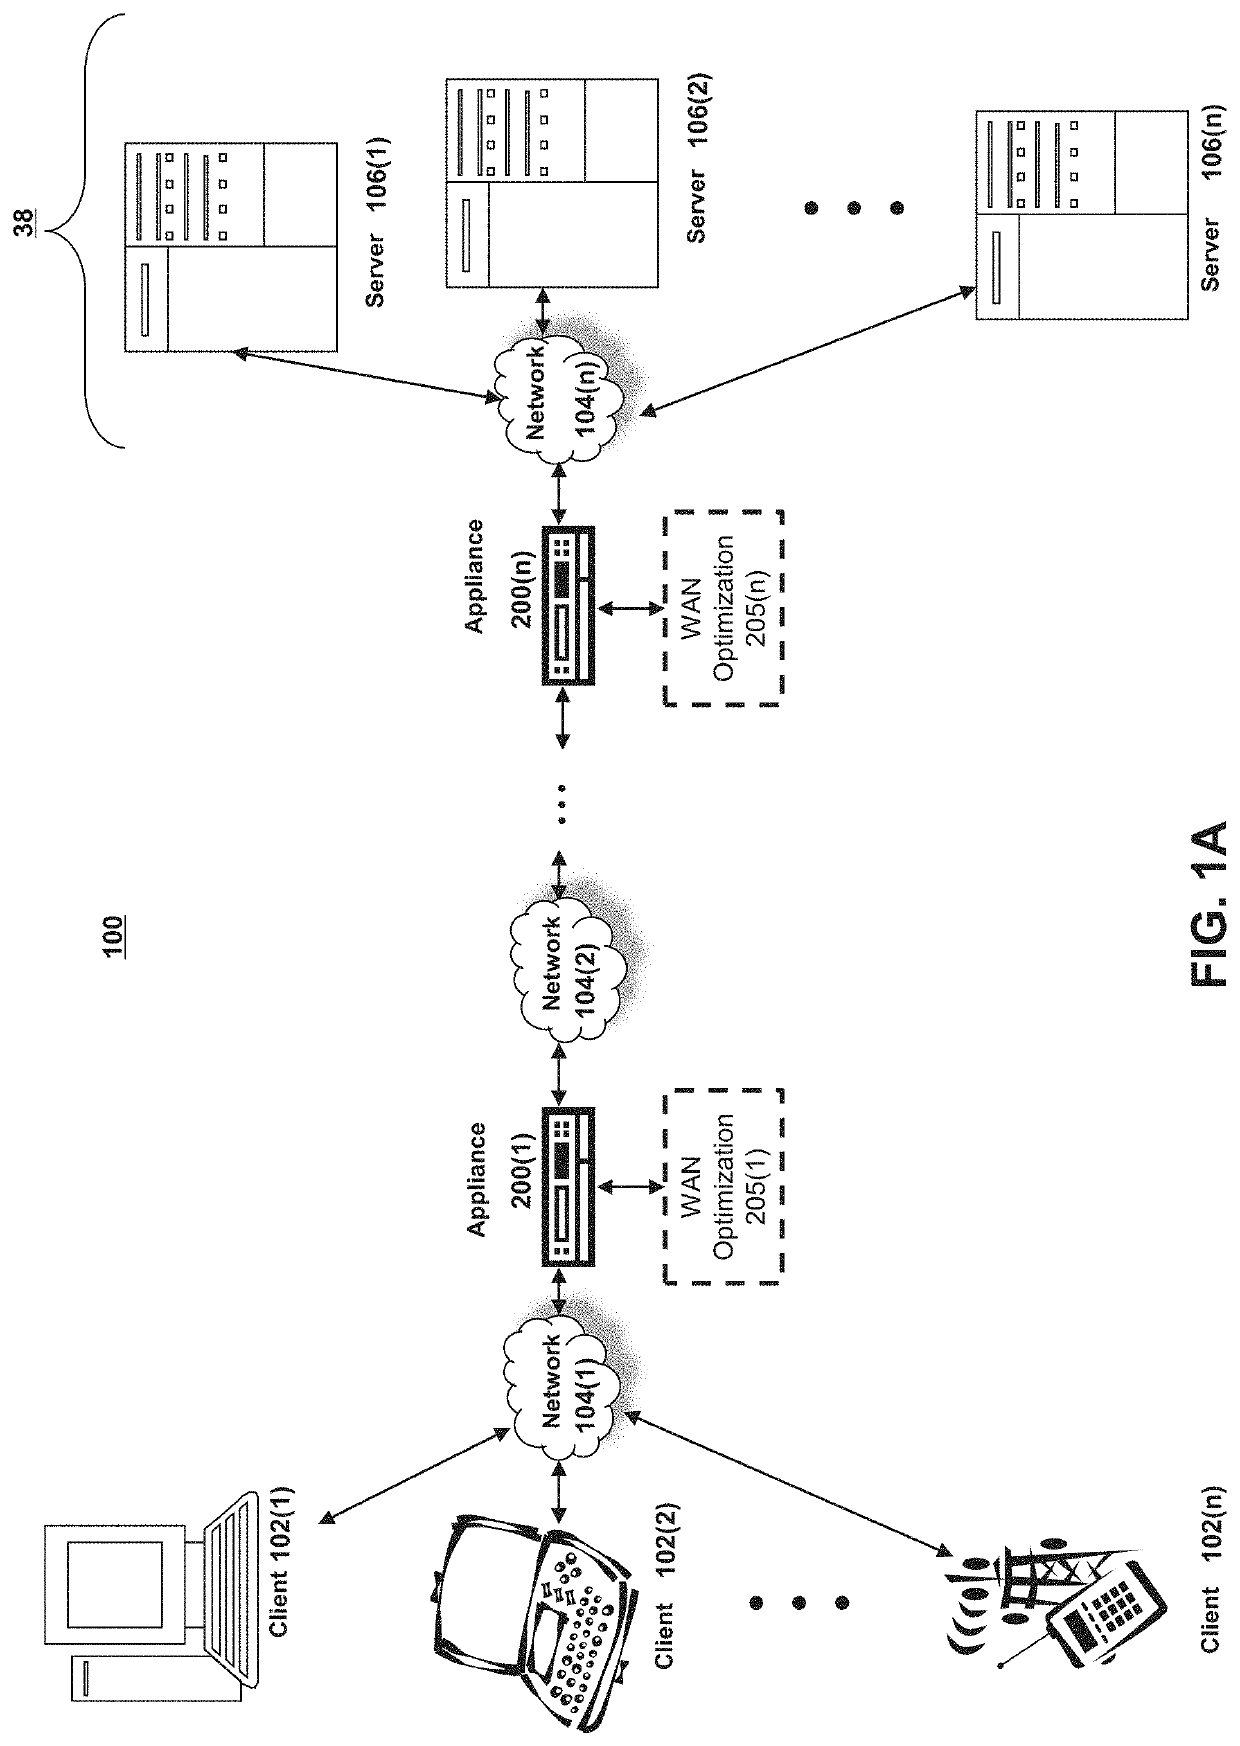 Systems and methods to operate devices with domain name system (DNS) caches